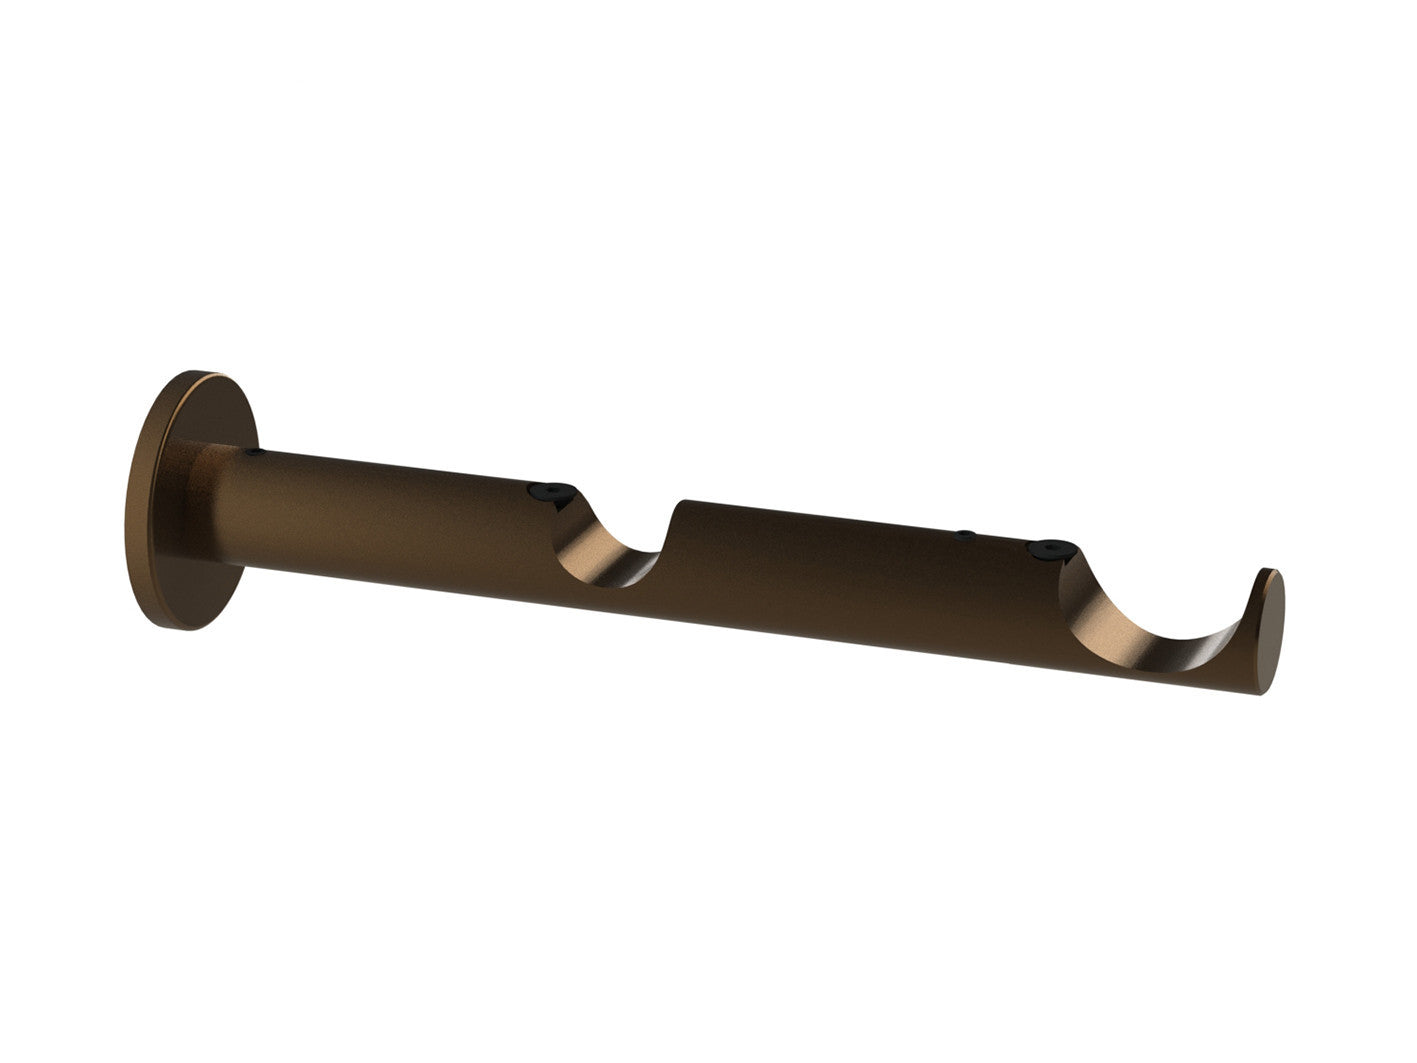 Double centre bracket for 19mm (back) and 30mm (front) dia. curtain poles